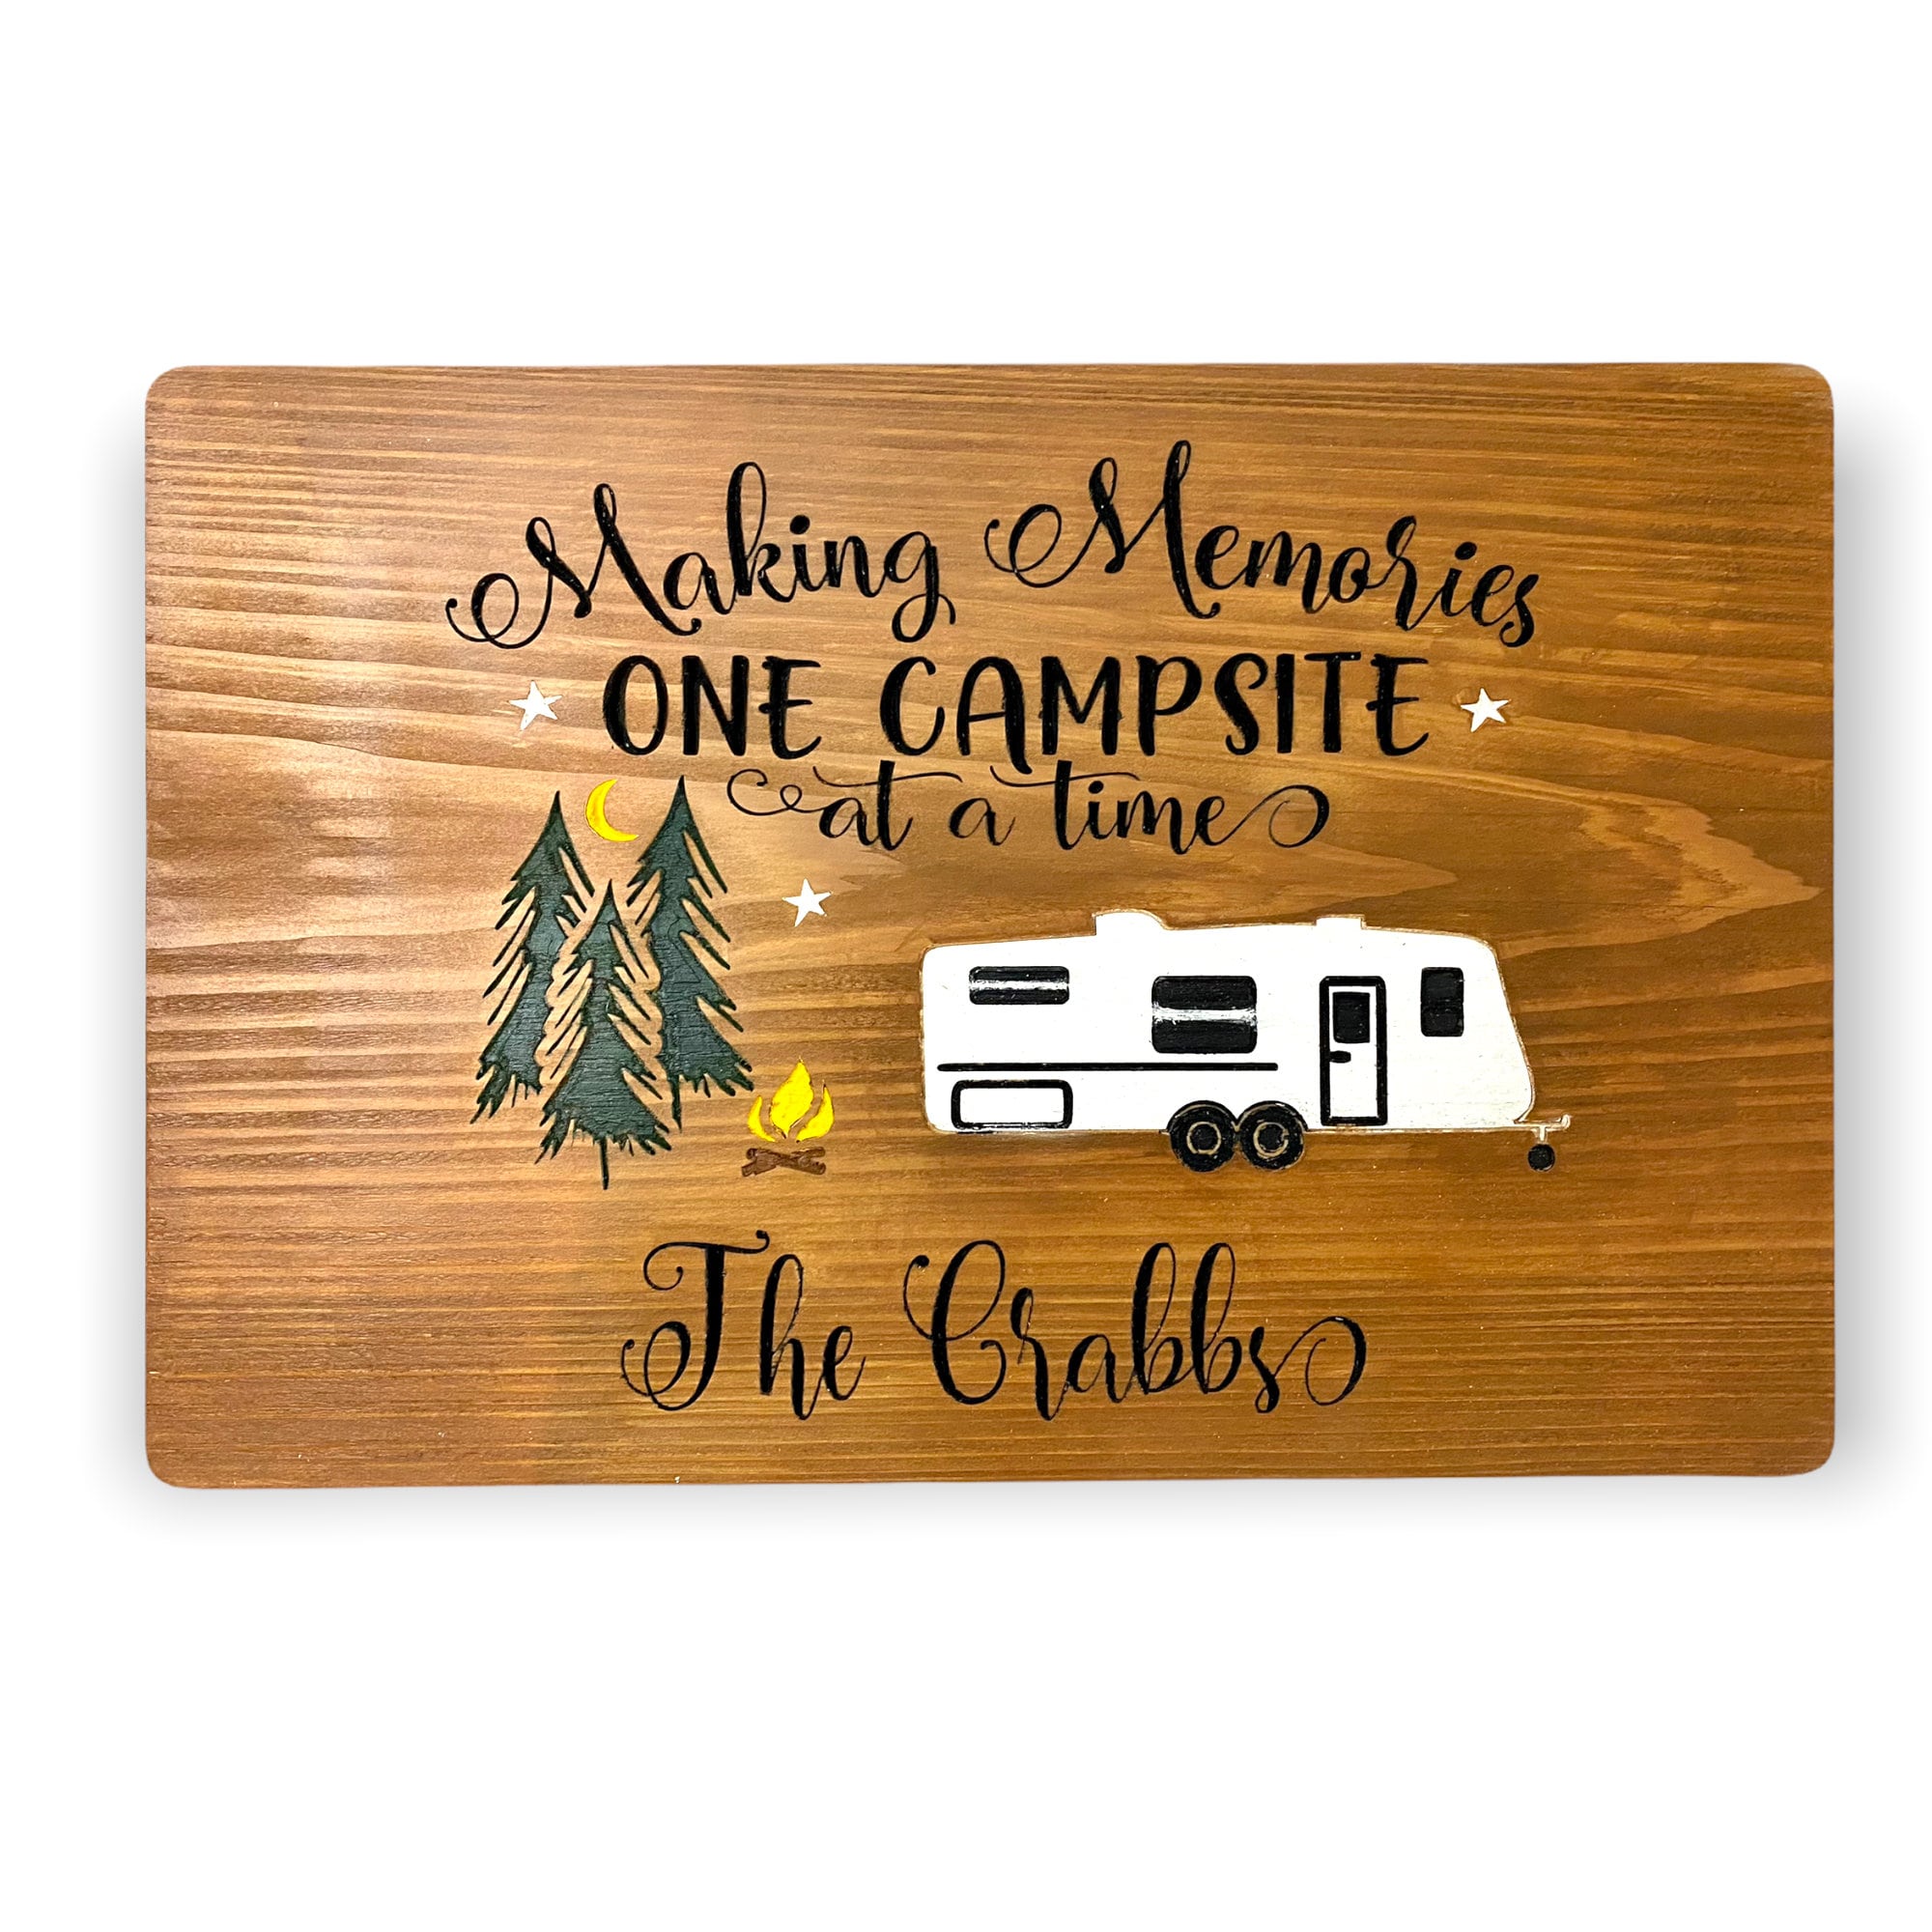 yuqier Custom Name Camper Accessories Personalized Camper Decor Sign Campsite Open All Year cmaking Memories one Campsite at a time